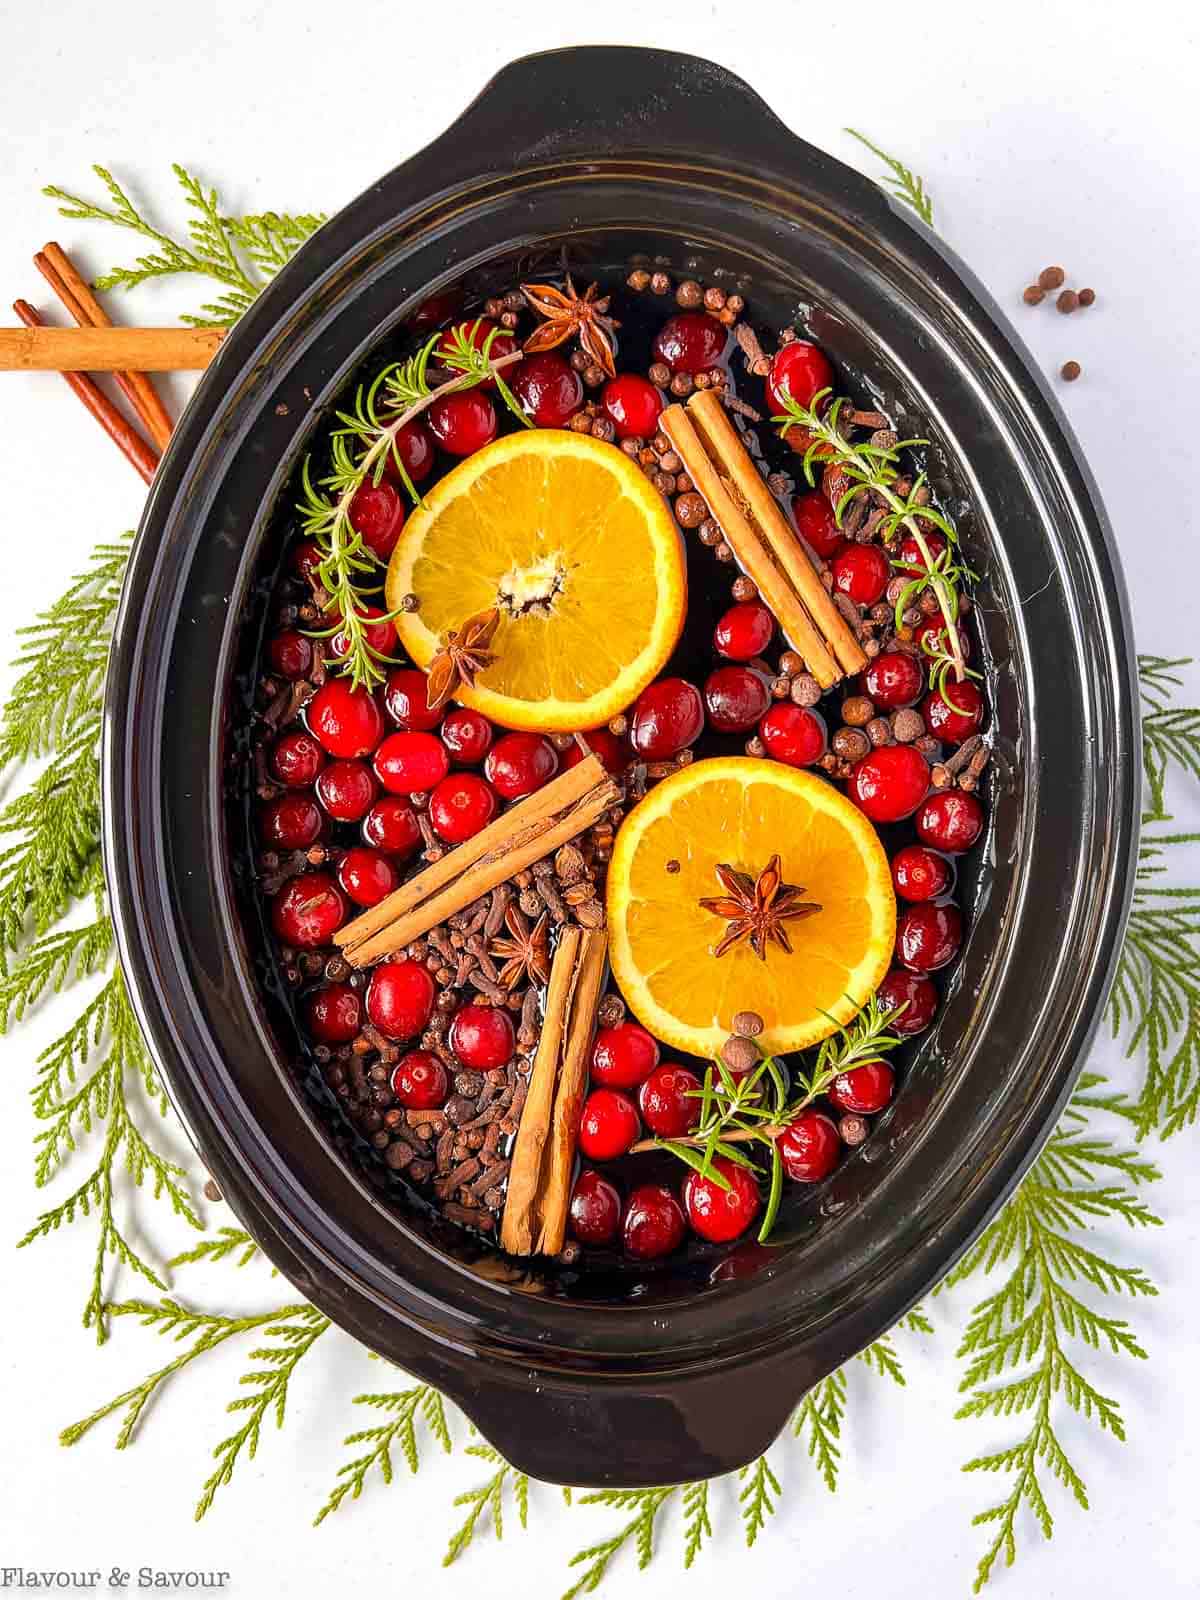 Overhead view of an oval slow cooker bowl with a potpourri spice mix floating in water with oranges and cranberries.